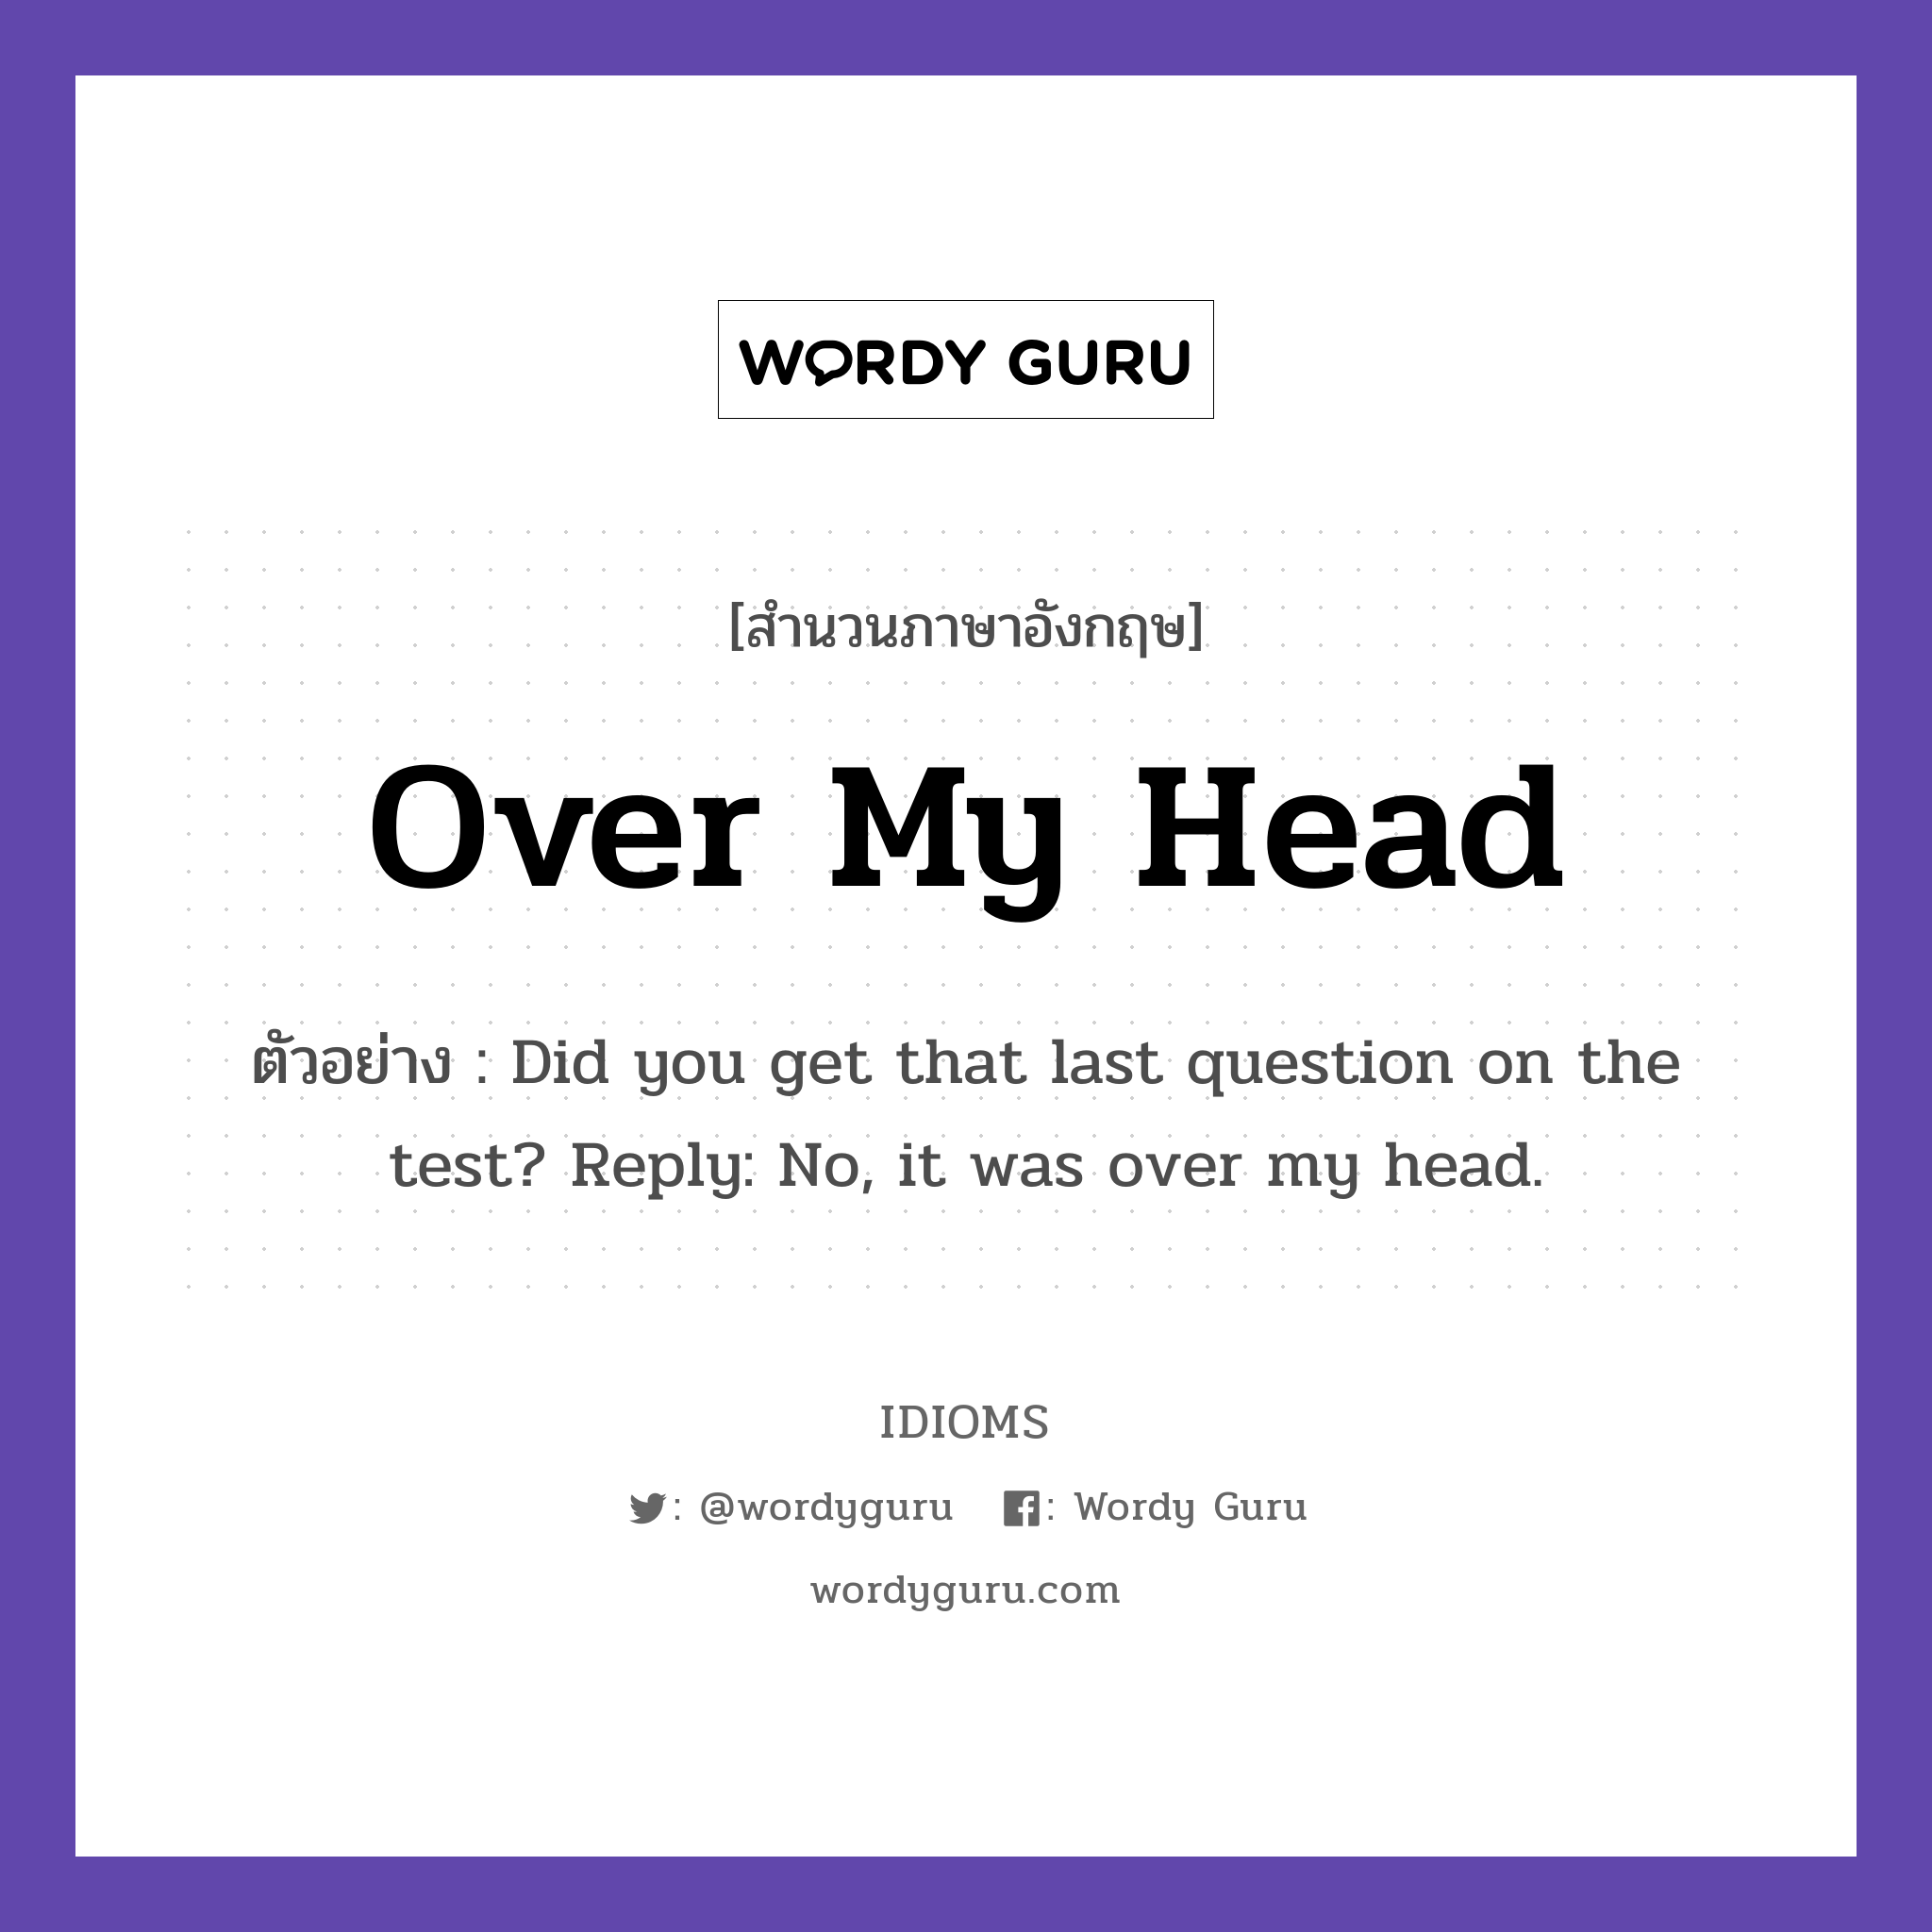 Over My Head แปลว่า?, สำนวนภาษาอังกฤษ Over My Head ตัวอย่าง Did you get that last question on the test? Reply: No, it was over my head.